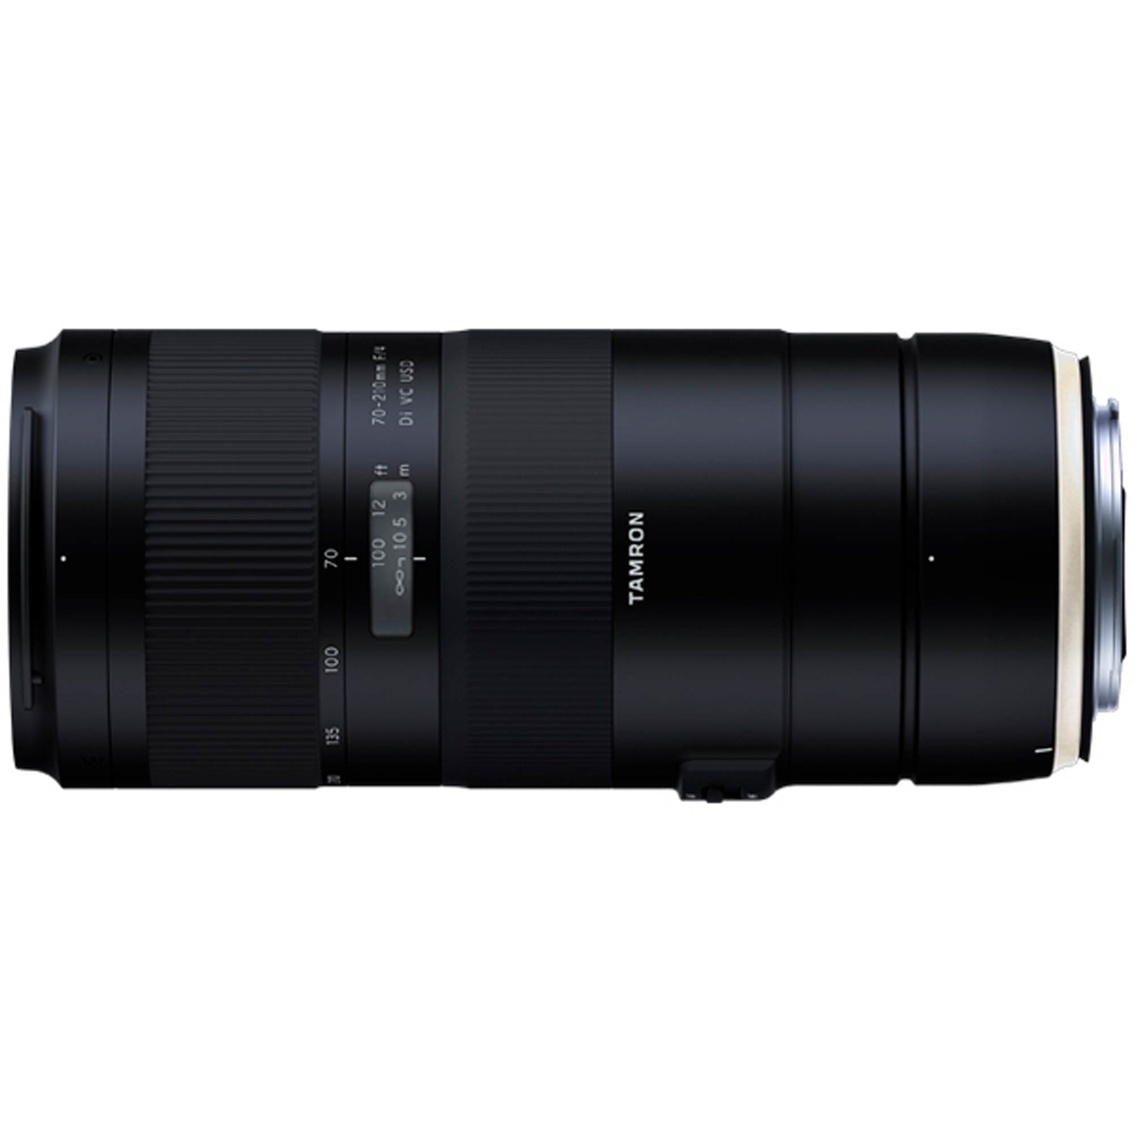 Tamron 70-210 F/4 Di VC USD Lens for Canon - Image 2 of 2